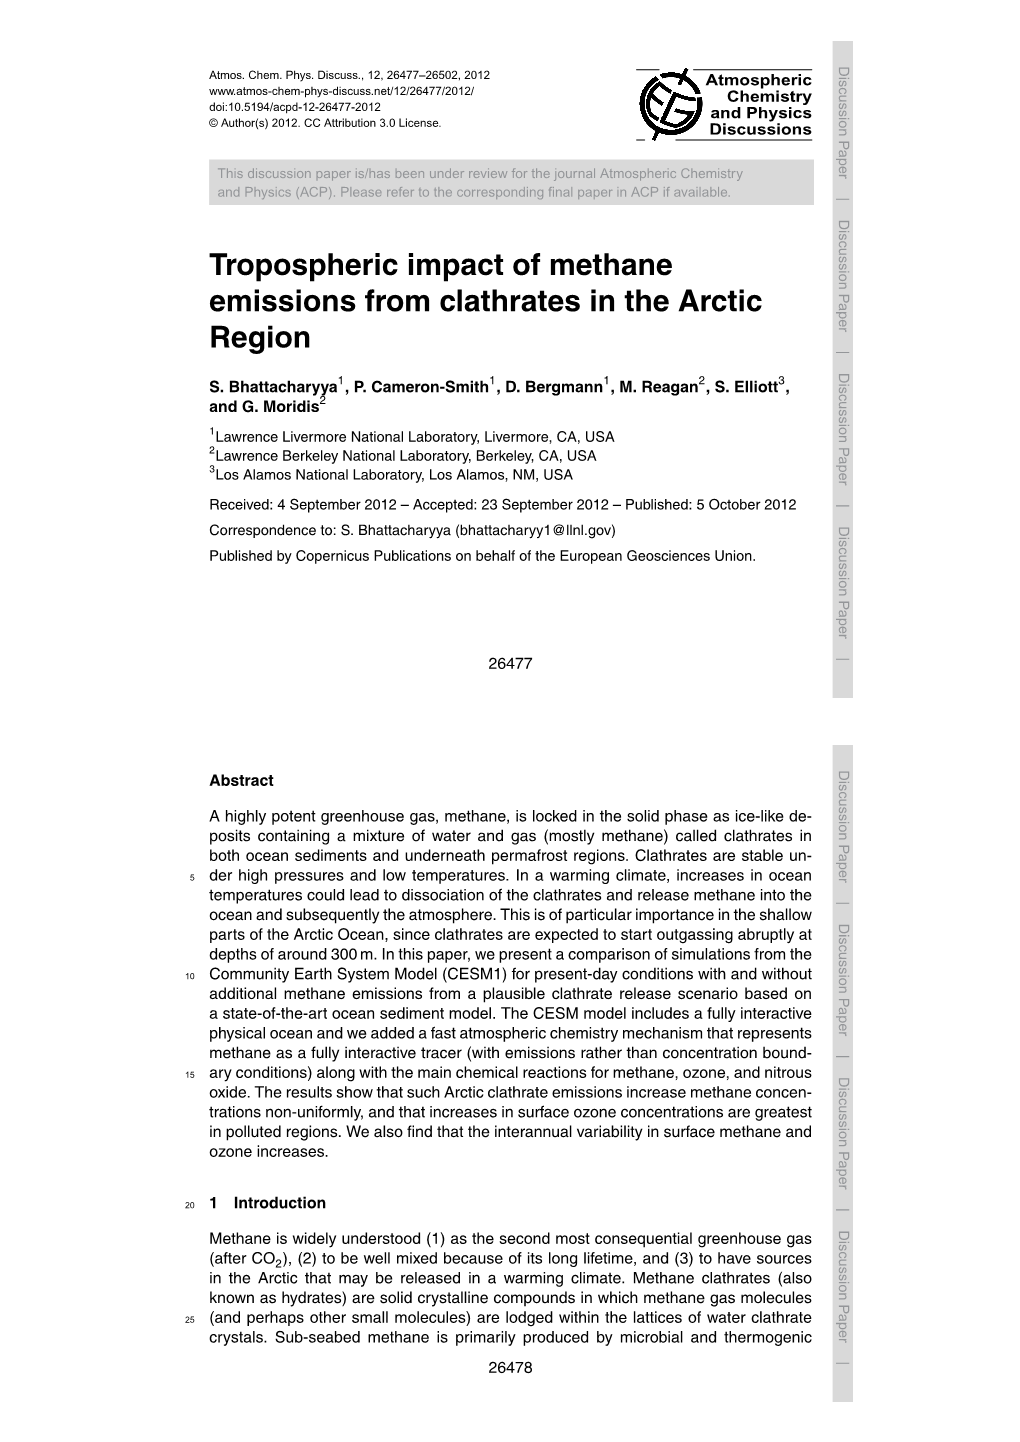 Tropospheric Impact of Methane Emissions from Clathrates in Theregion Arctic S